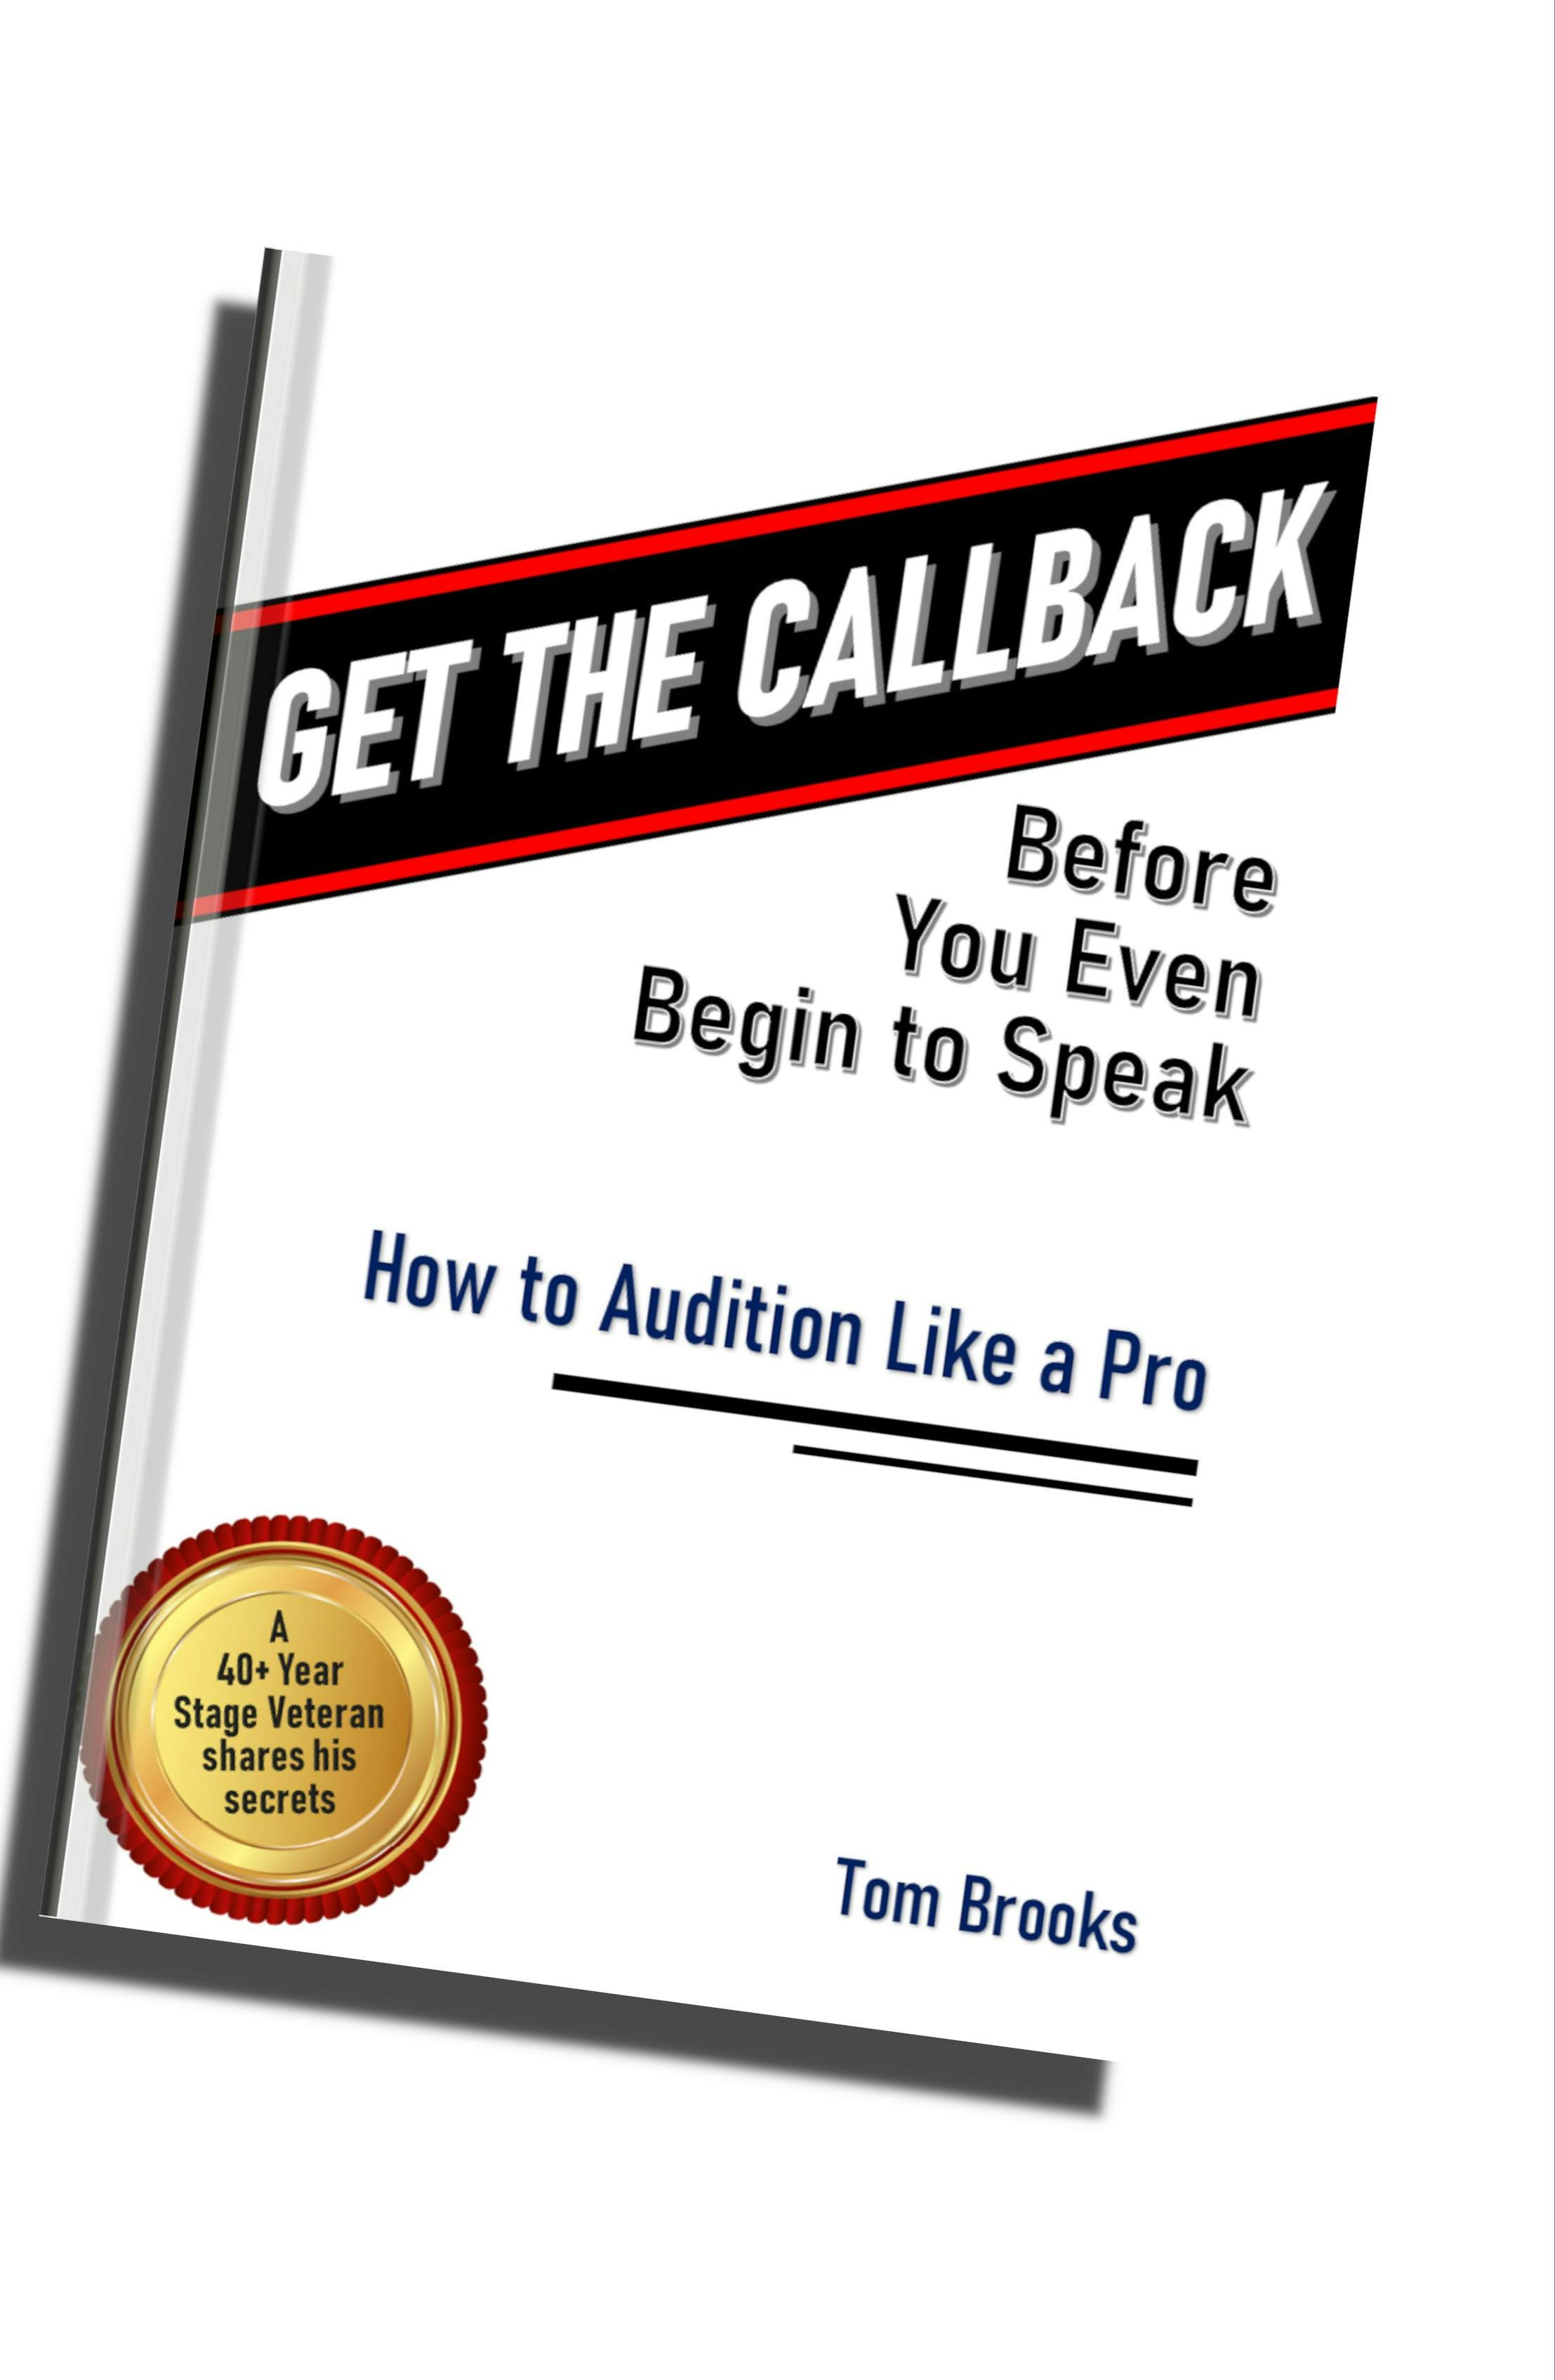 Get the Callback Before You Even Begin to Speak